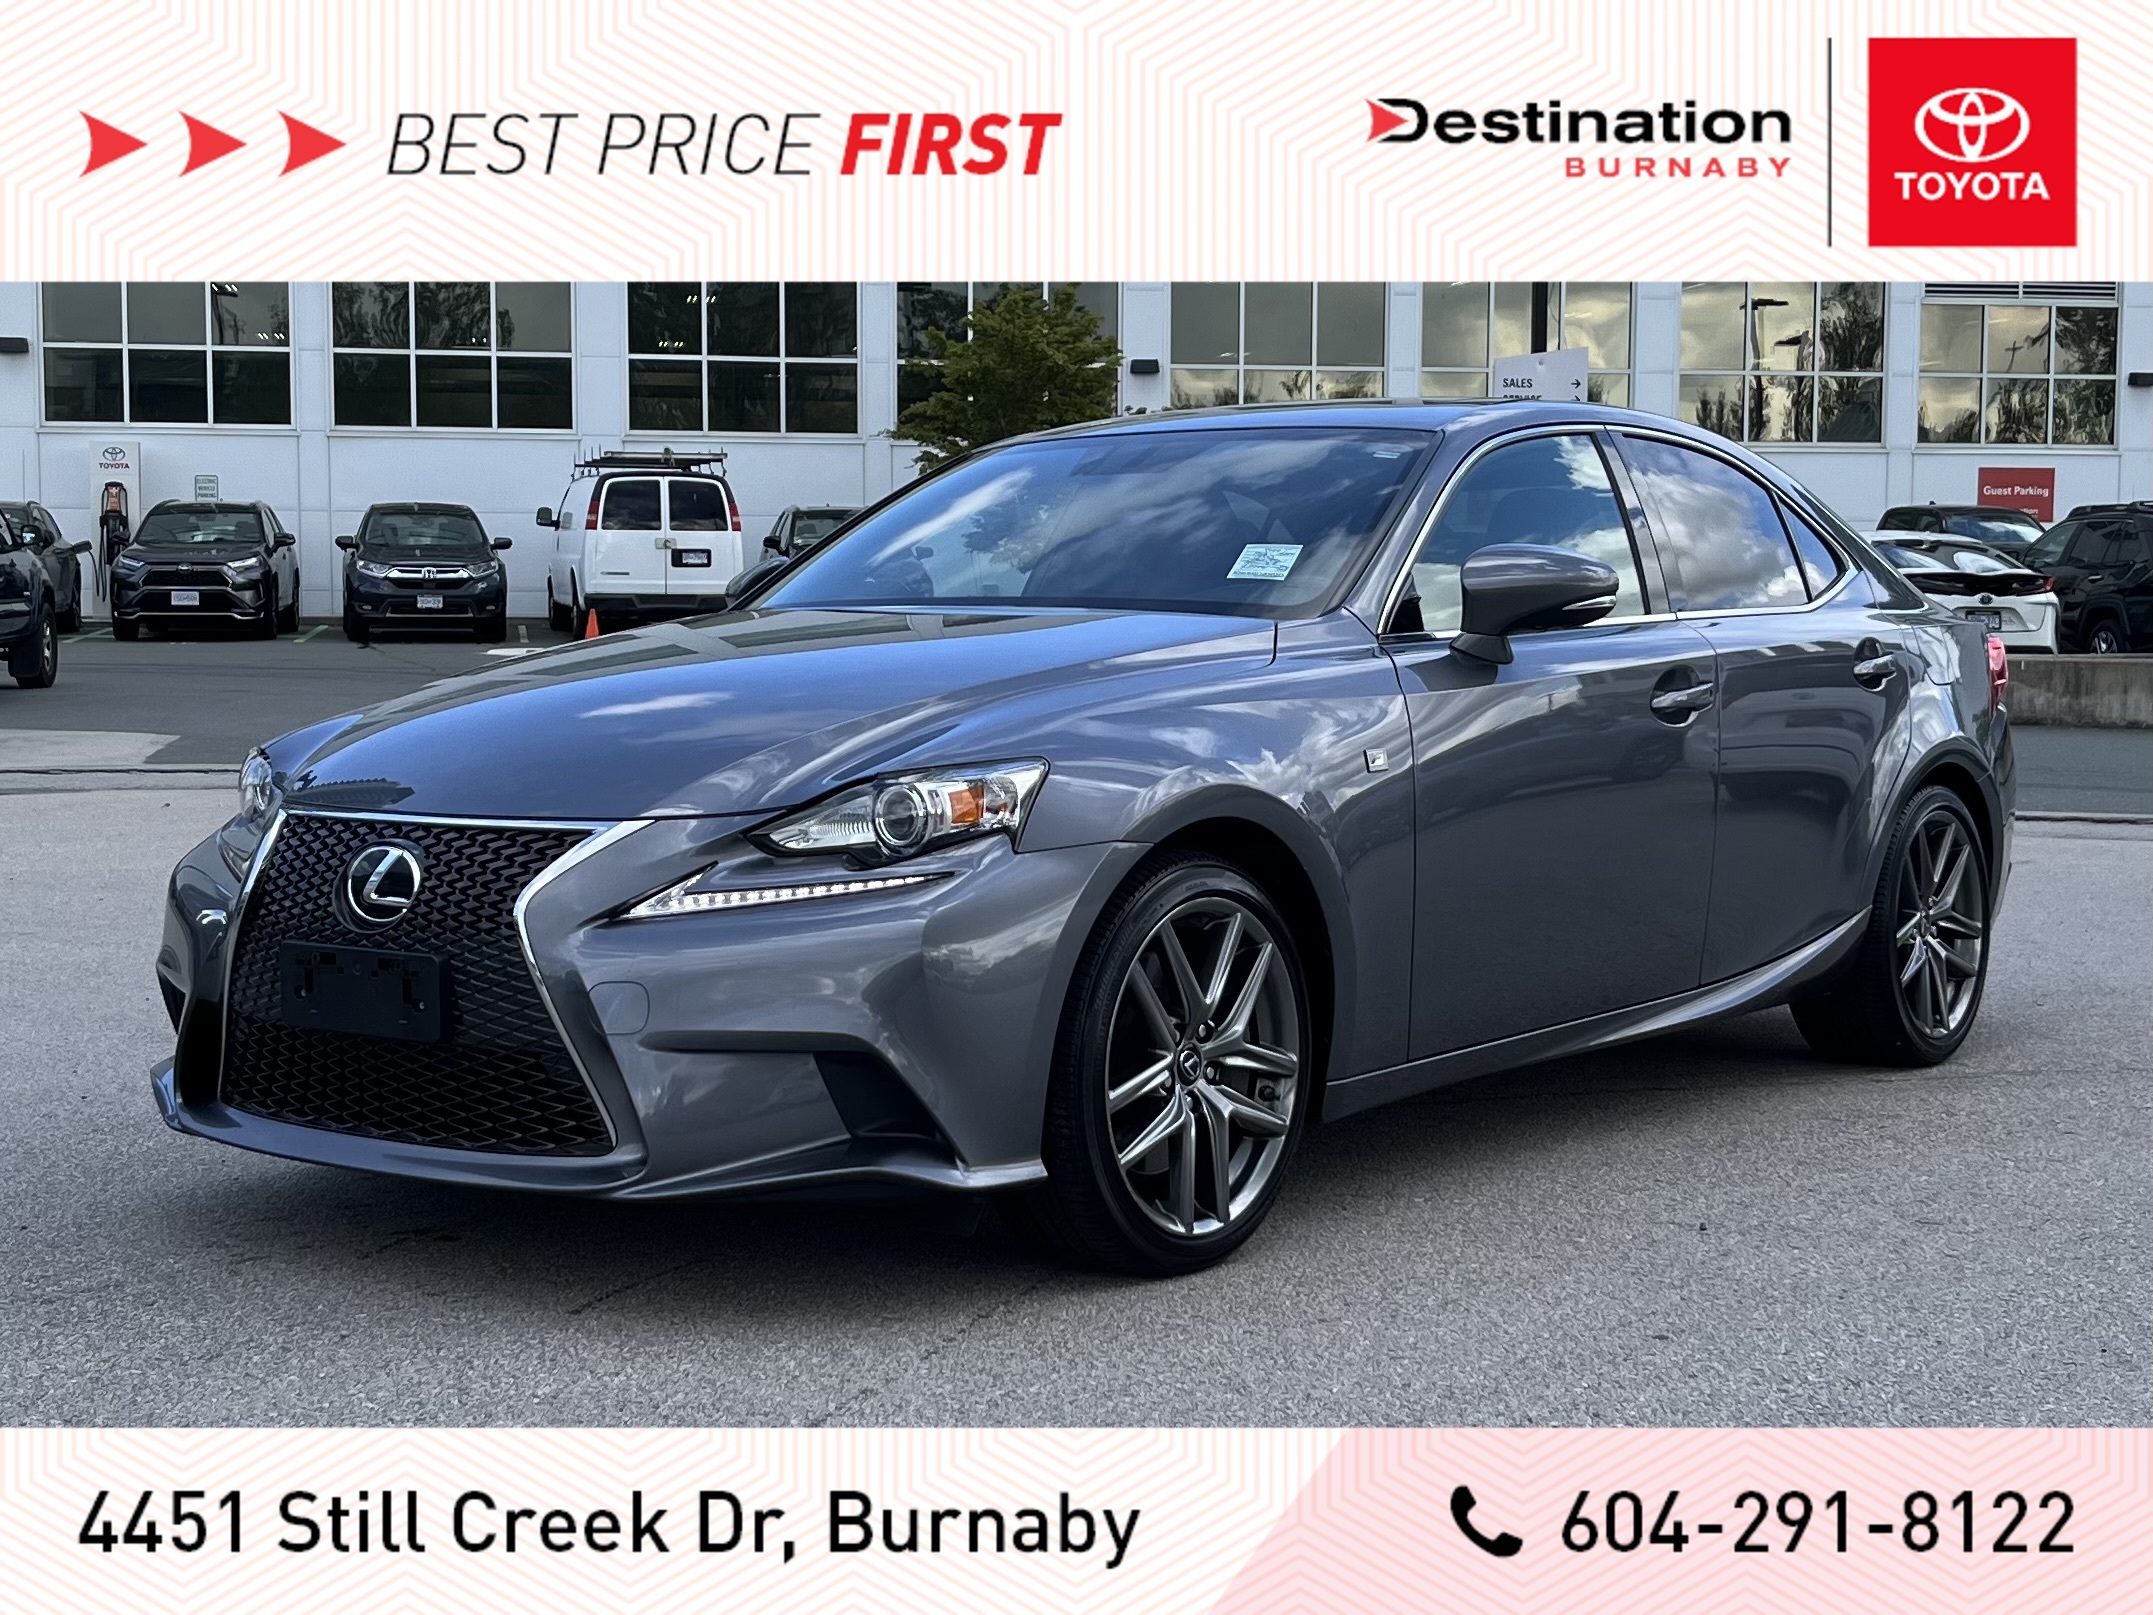 2016 Lexus IS 200t F Sport, No accidents, Loaded